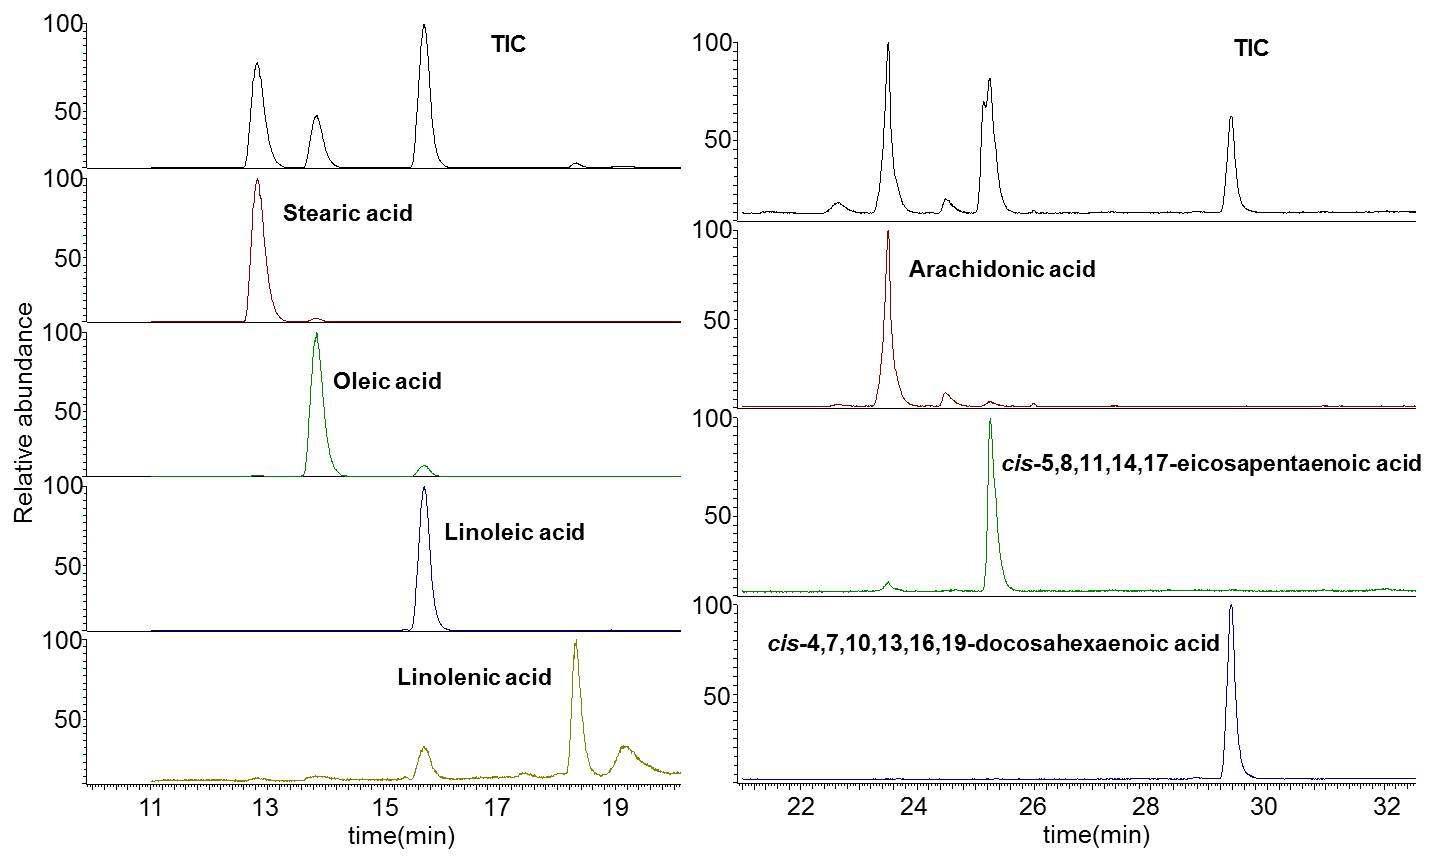 GC-MS　chromatograms　of　fatty acid methyl esters extracted from infant formula by EI-MS (left) and CI-MS (right)